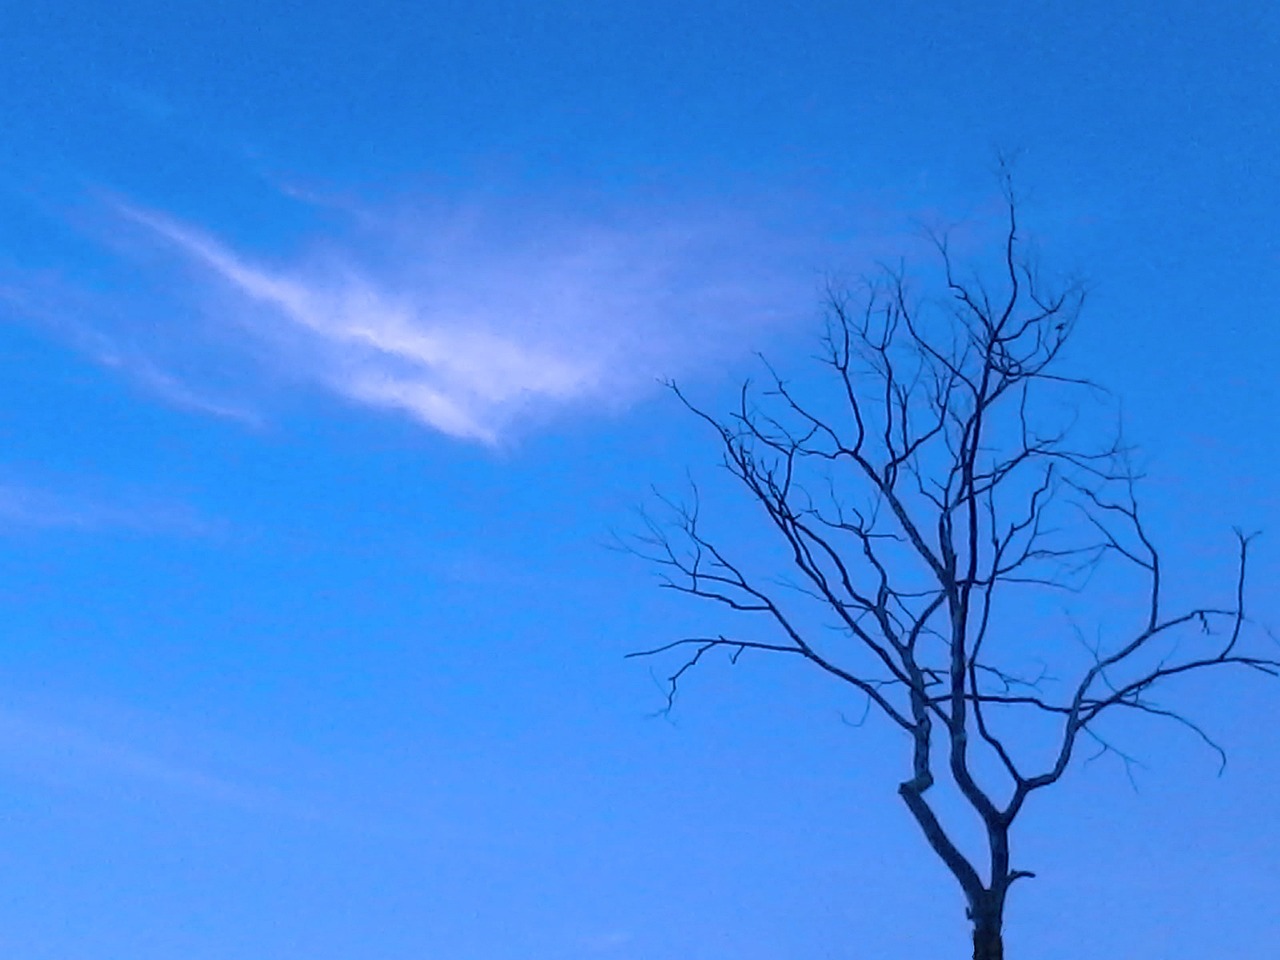 a lone tree is silhouetted against a blue sky, inspired by Rene Magritte, flickr, ((oversaturated)), angels in the sky, thin blue arteries, reminded me of the grim reaper